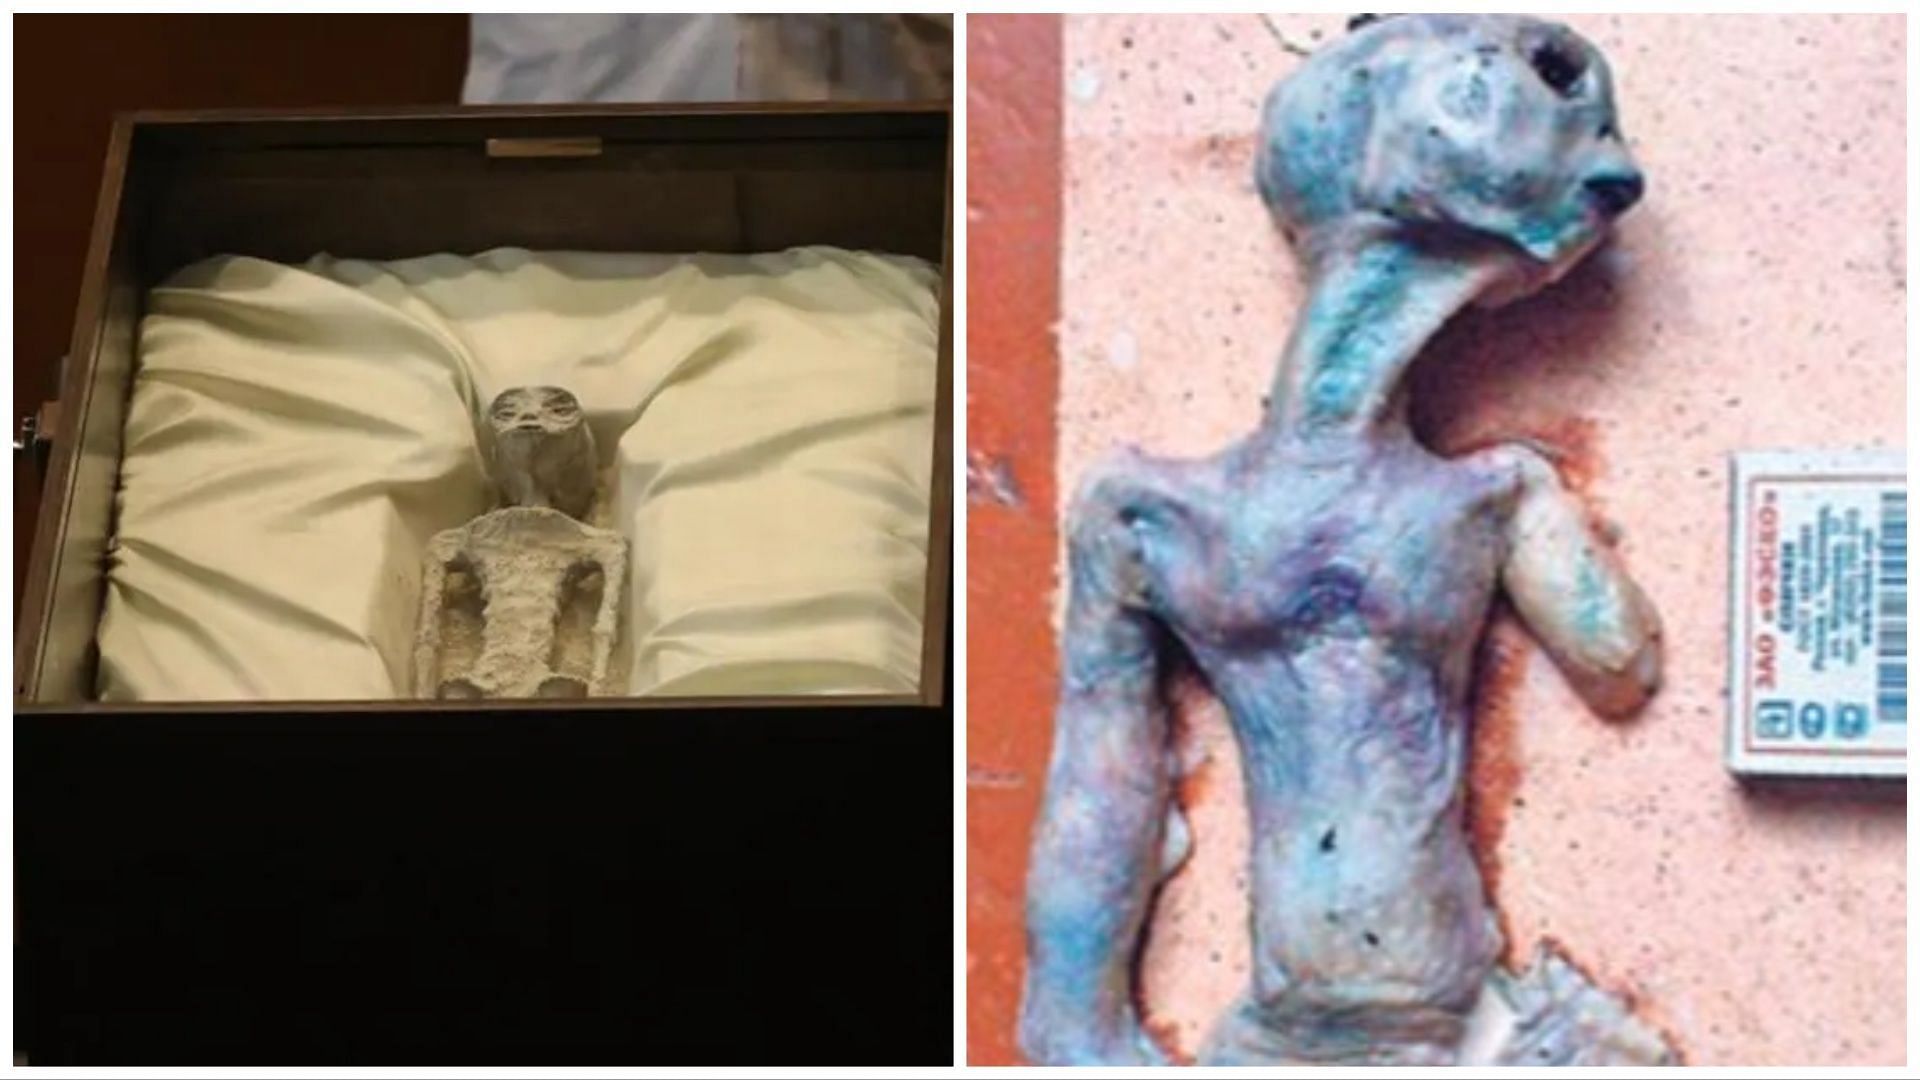 The body that was presented in Mexico (Left) vs the fake alien body found in Siberia (Right) (Image via Associated Press)